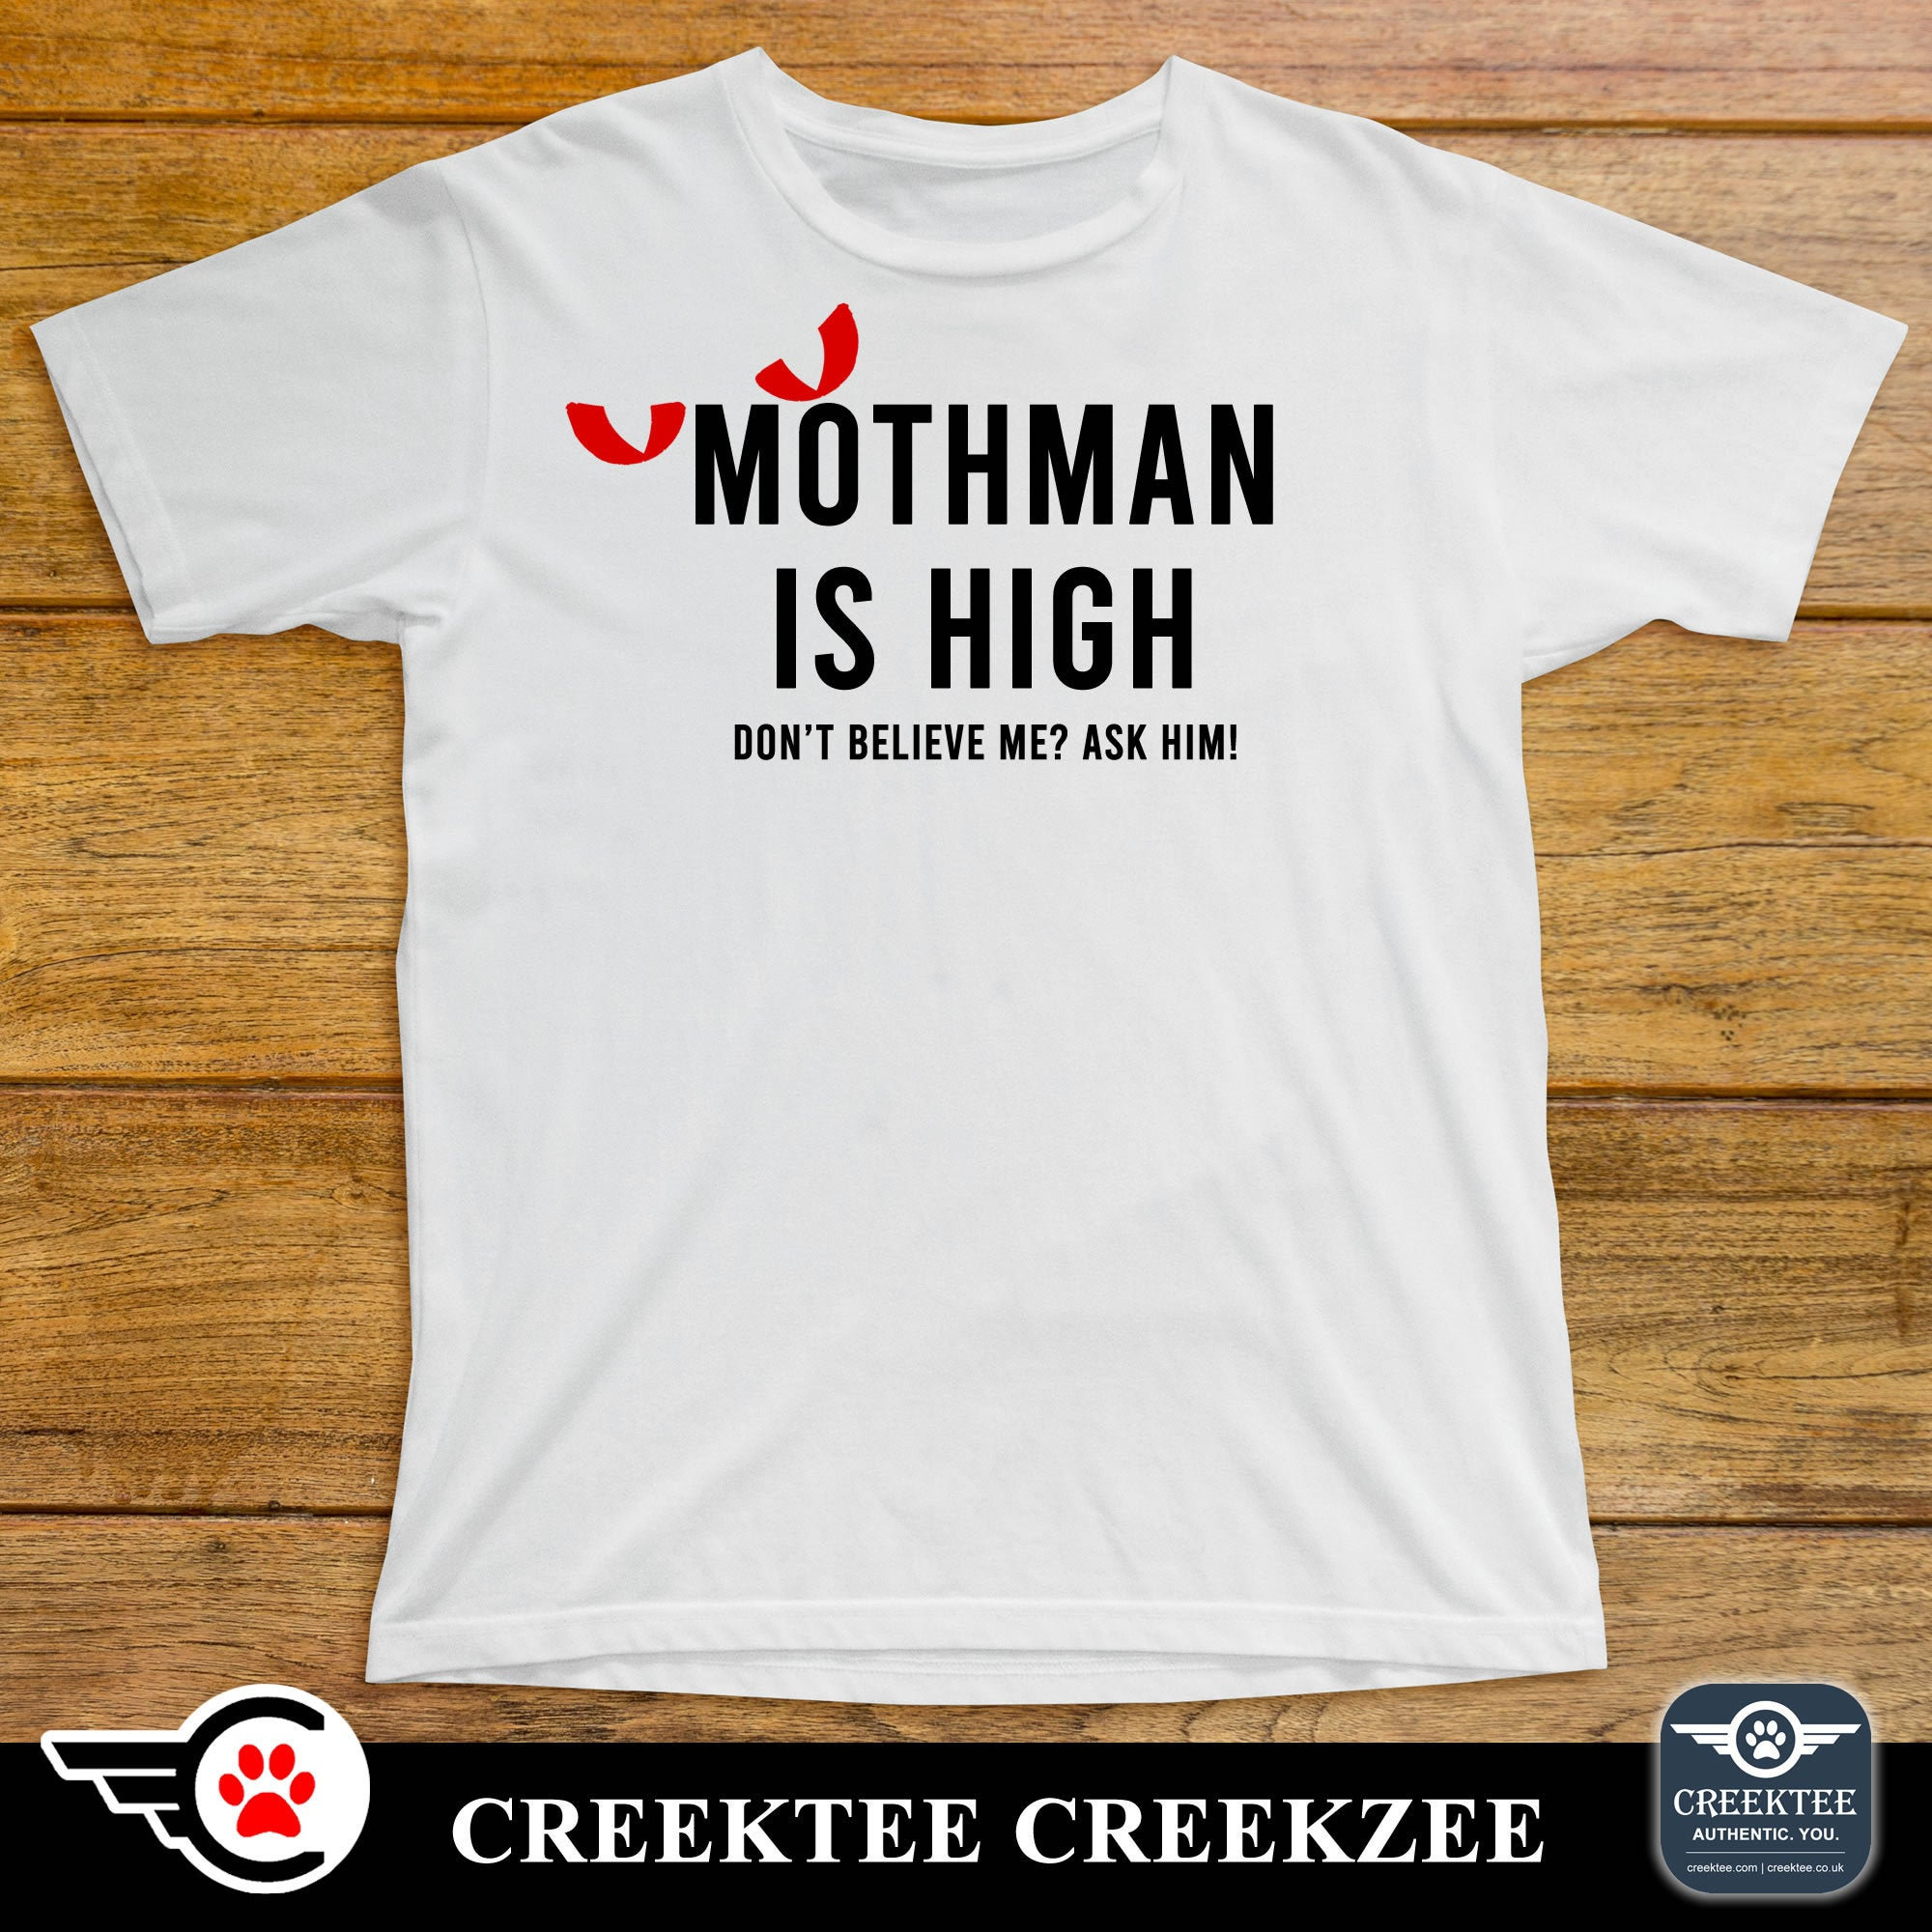 T-Shirt Mothman is high Don't believe me? Ask him! Quality T-Shirt. Vinyl Print Full Color, Uniquely Designed To Stand Out